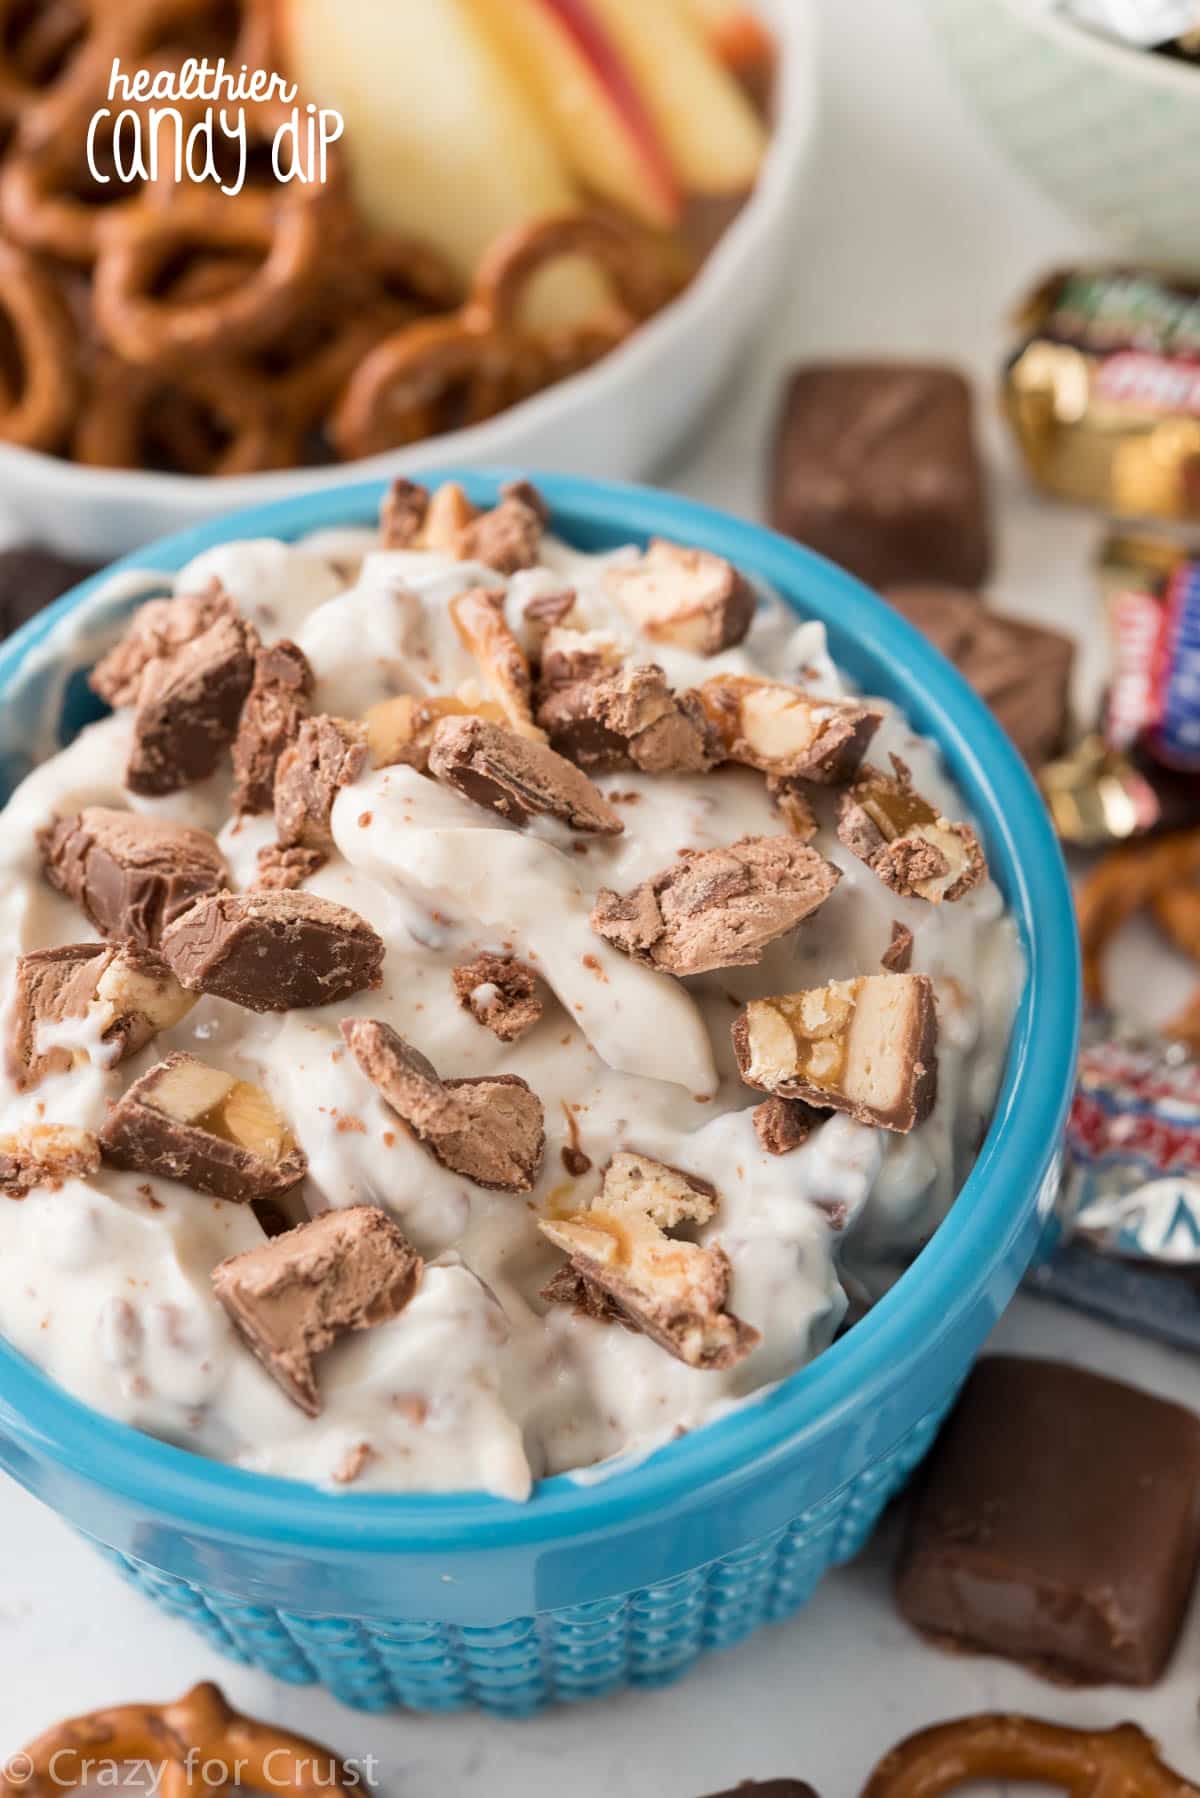 This easy Skinny Candy Dip has only 3 ingredients! It's a fast and easy recipe that's the perfect party dip!